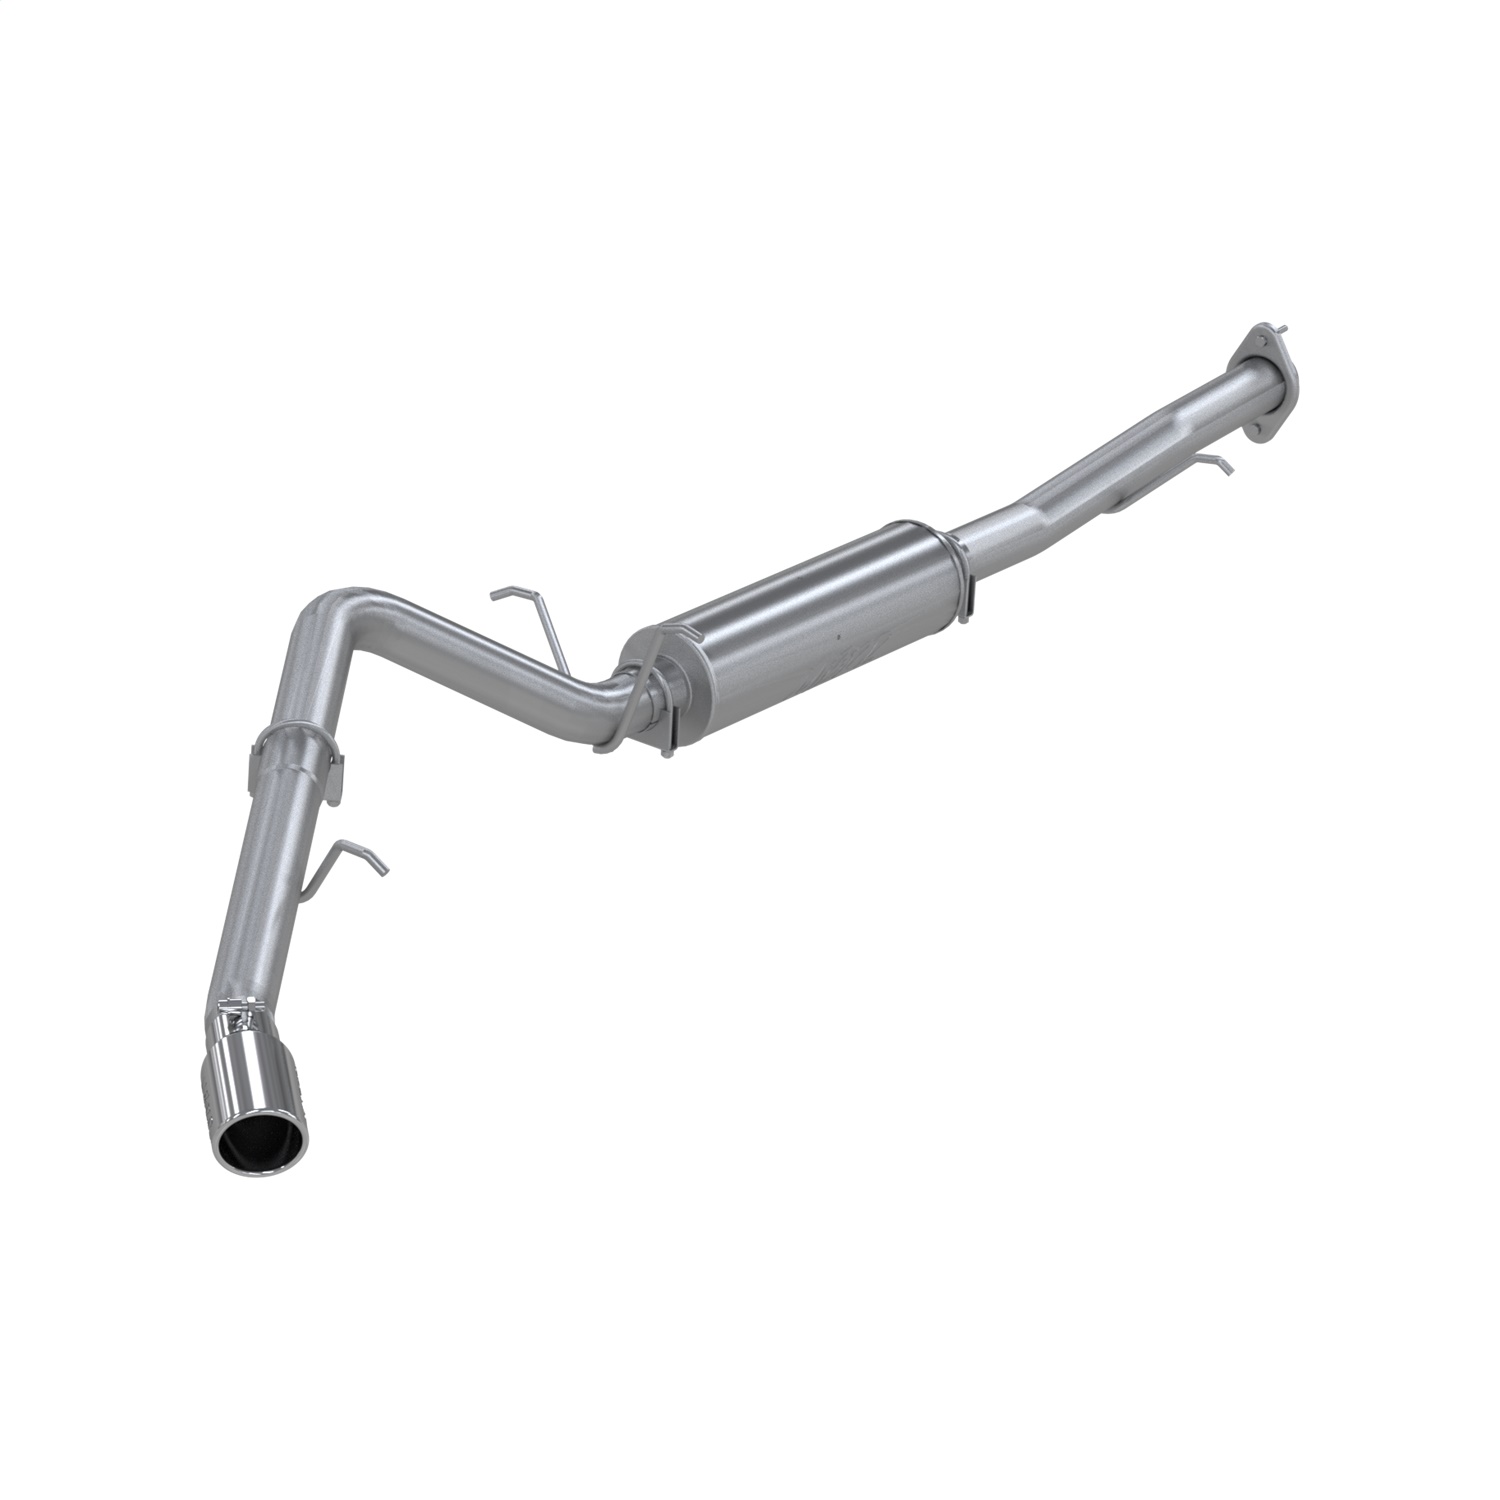 MBRP Exhaust S5044409 Armor Plus Cat Back Exhaust System Fits 07-08 Tahoe Yukon